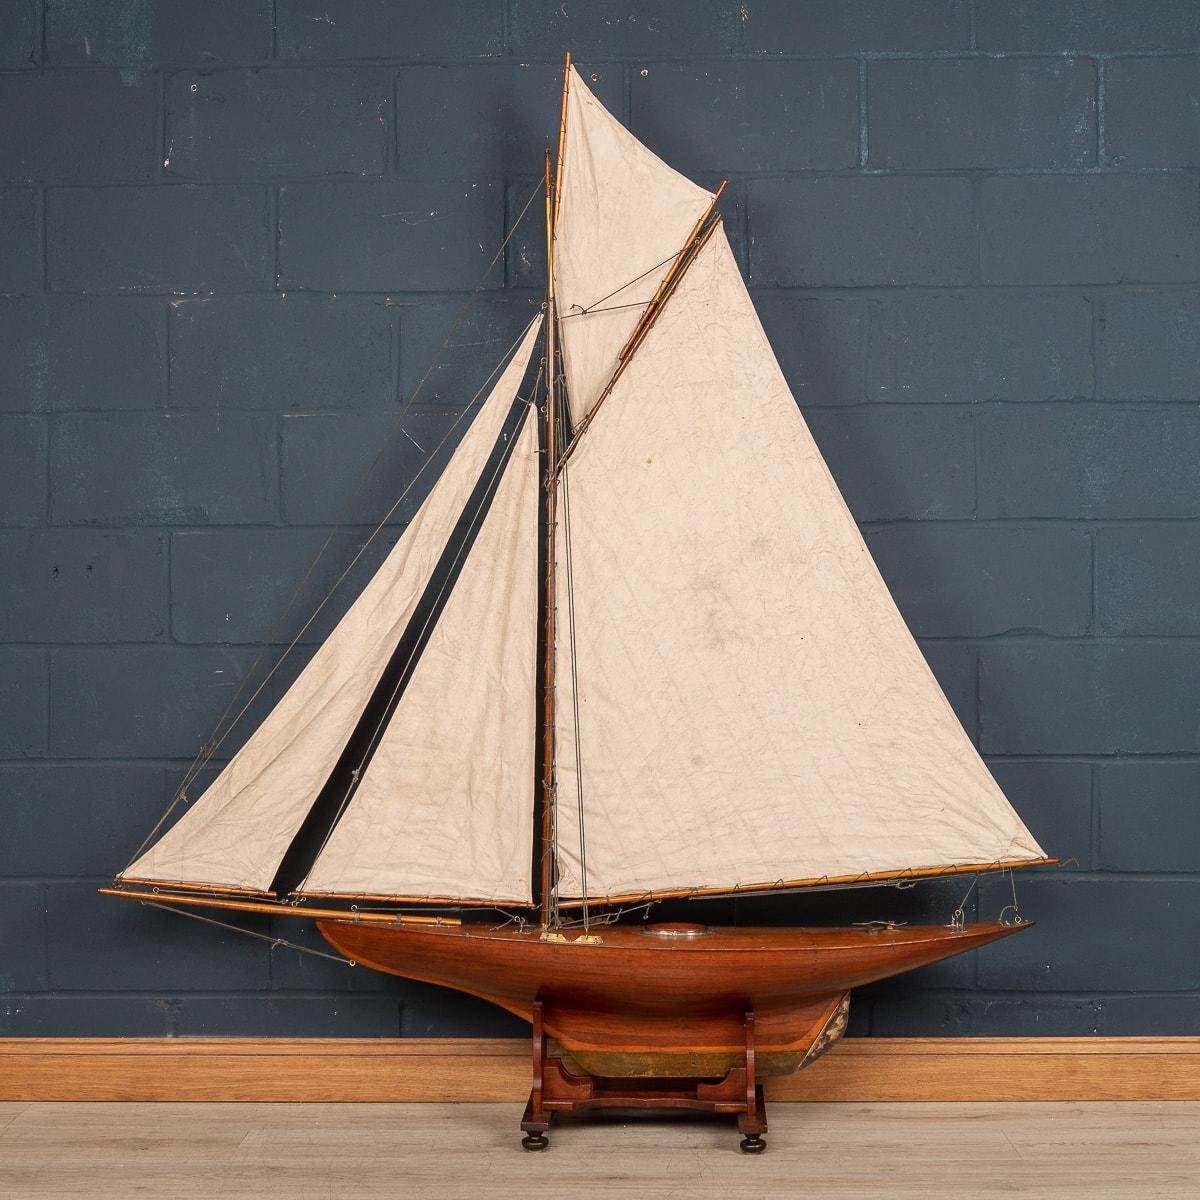 A massive antique gaff rigged cutter pond yacht, lovely mahogany plank on frame hull dating to the first half of the 20th century. The yacht is an example of British pond racing yacht and would have raced against similar yachts in competitions, club